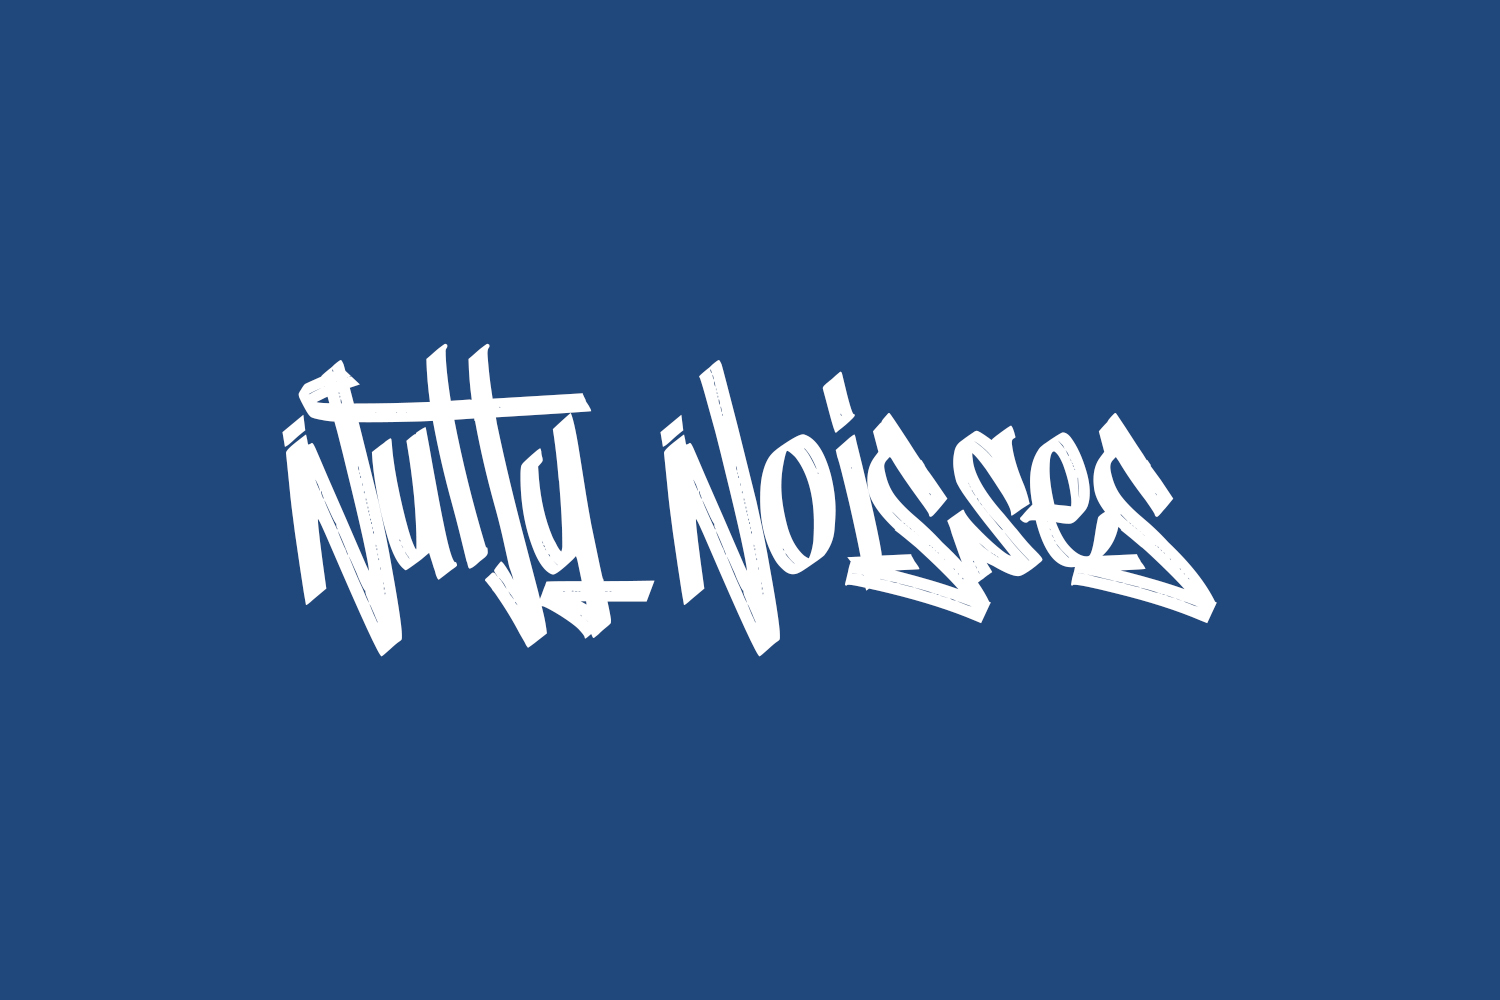 Nutty Noisses Free Font